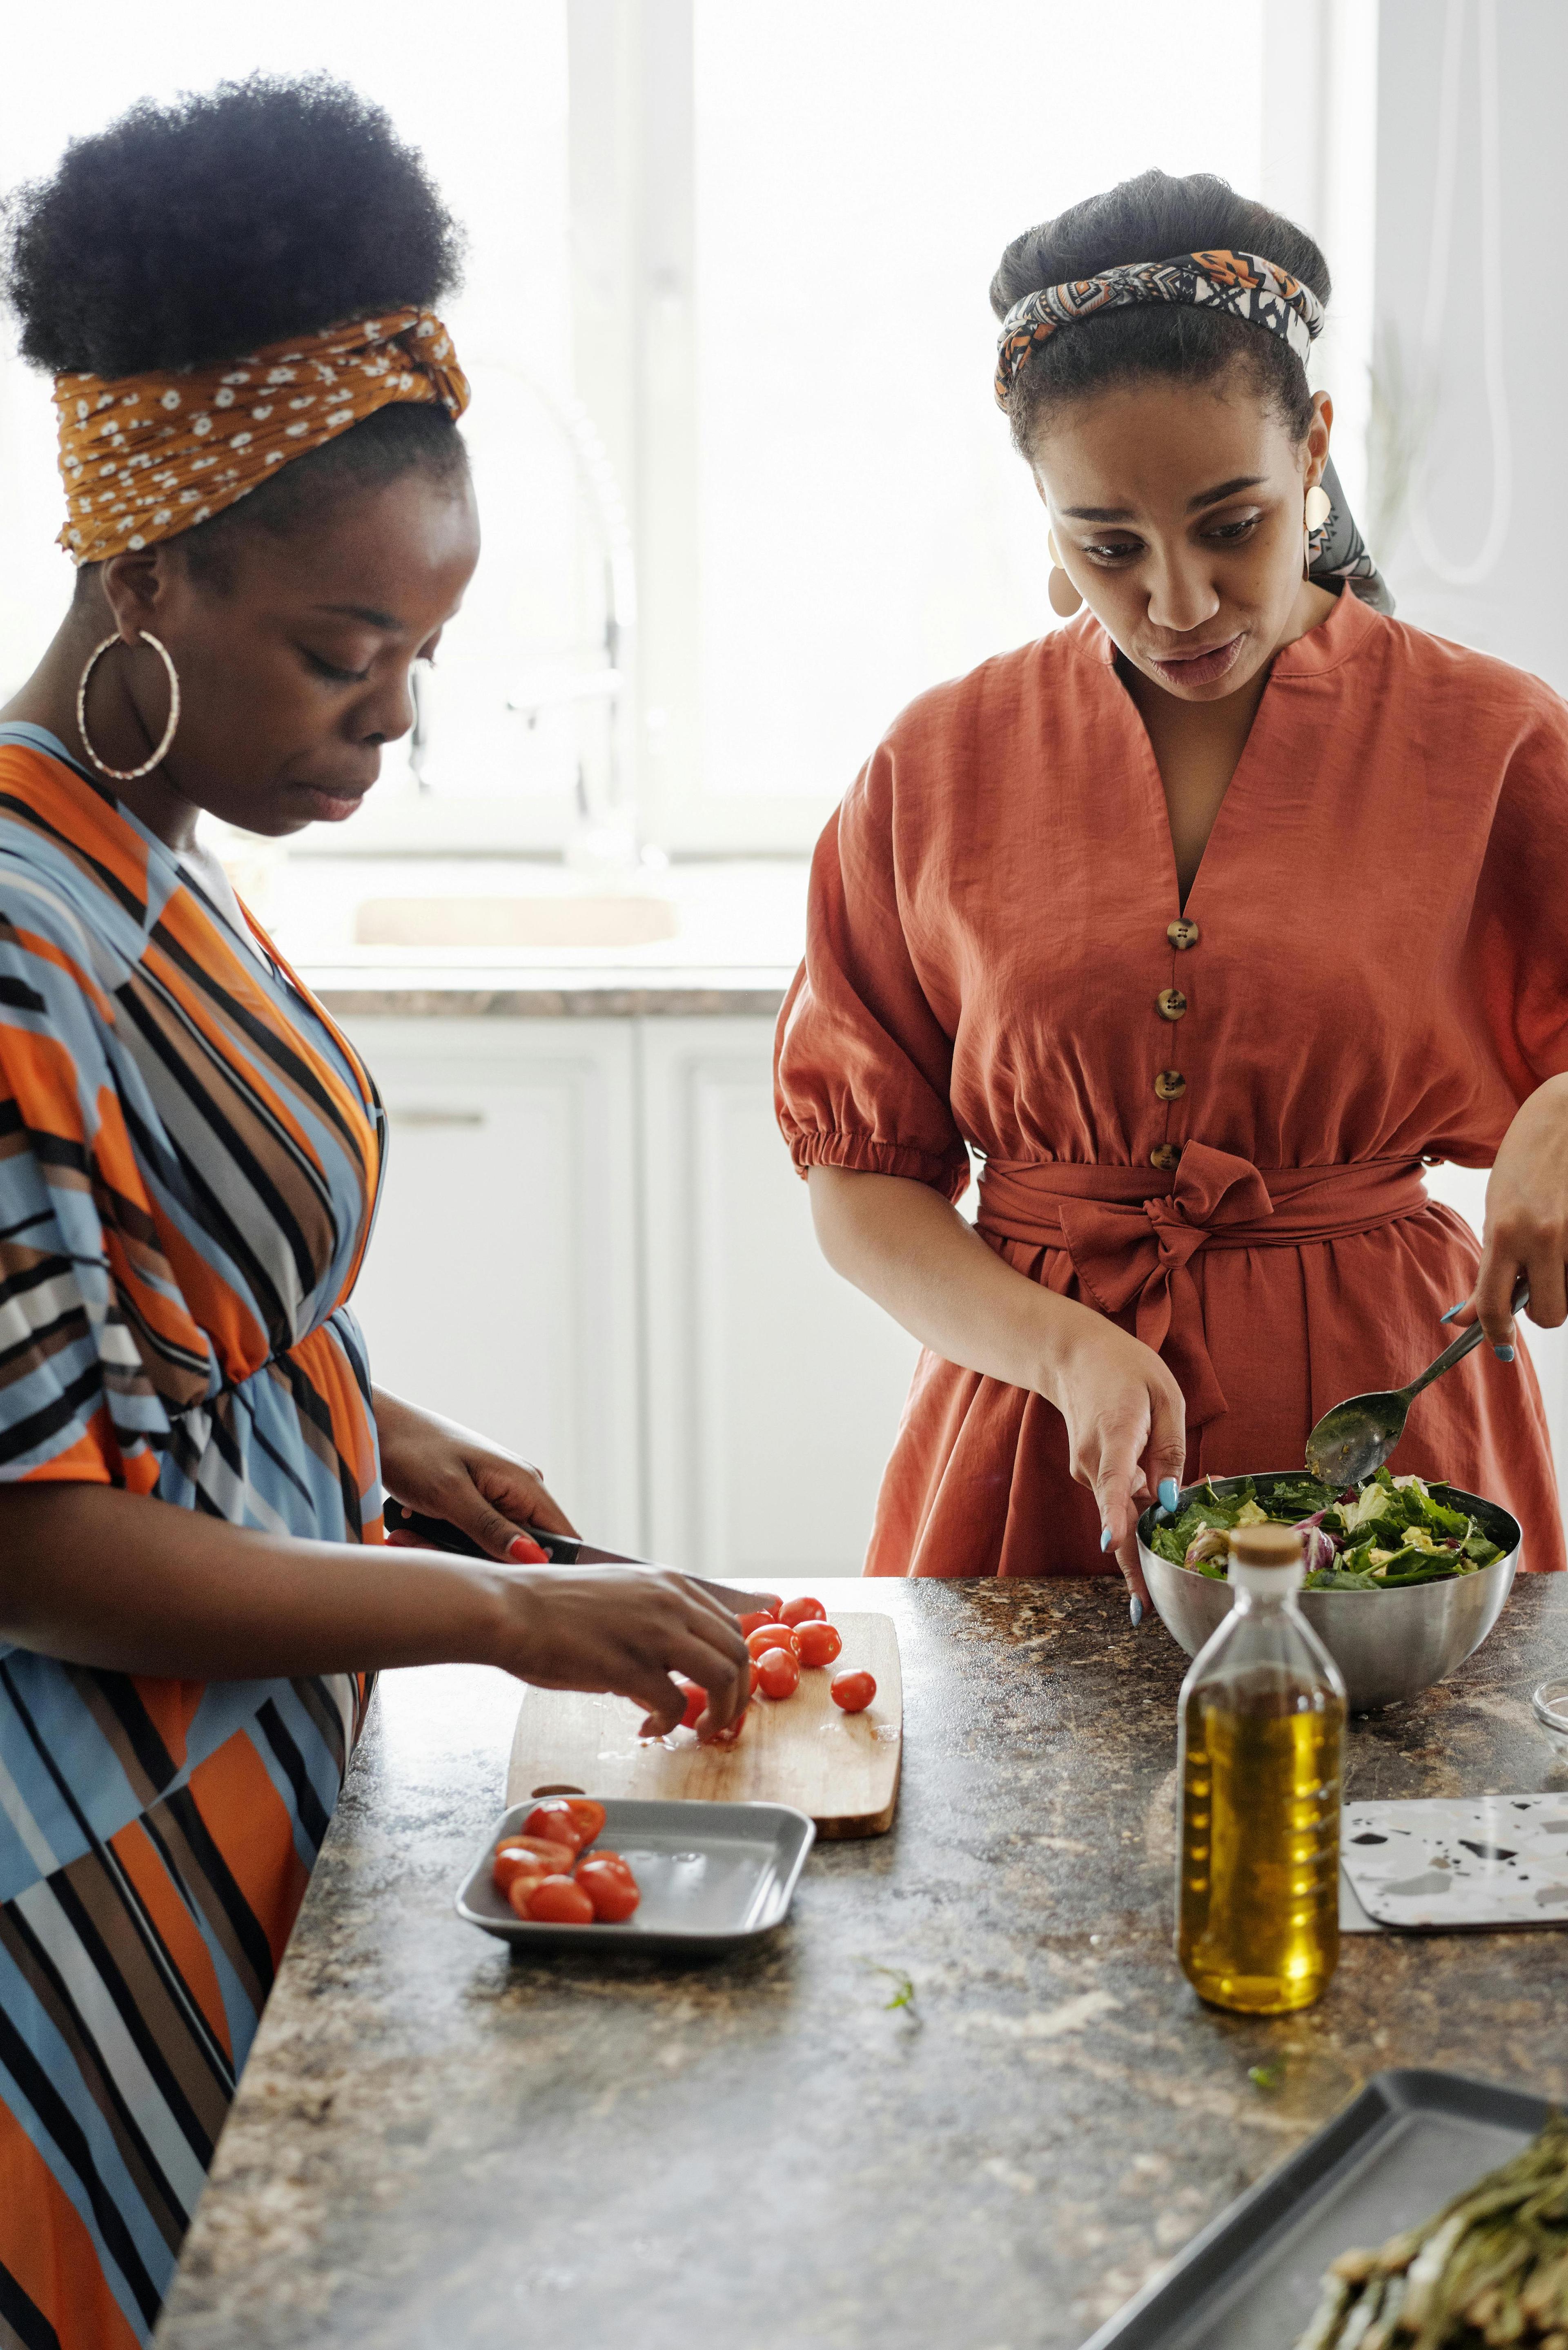 Two black women prepare food at a kitchen counter